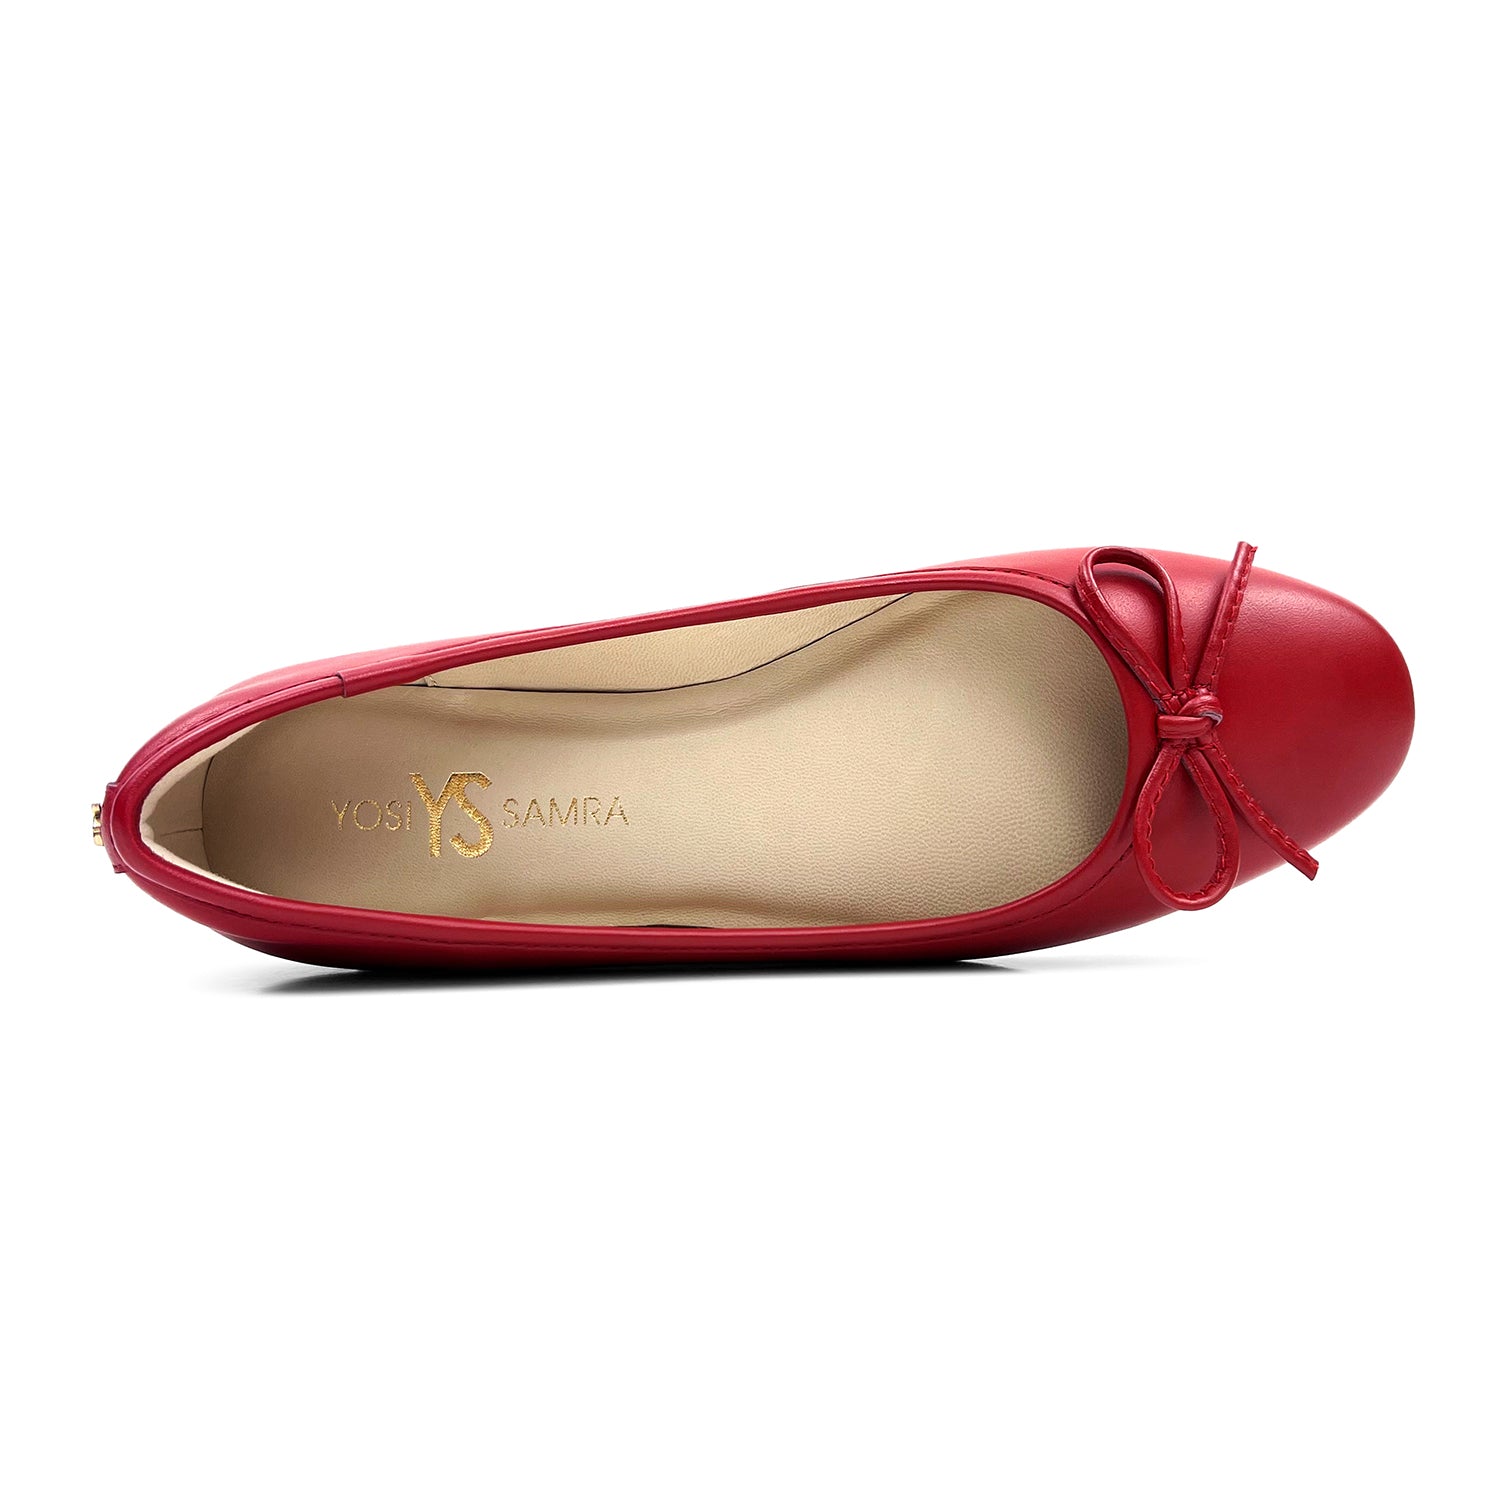 Sadie Ballet Flat in Red Nappa Leather